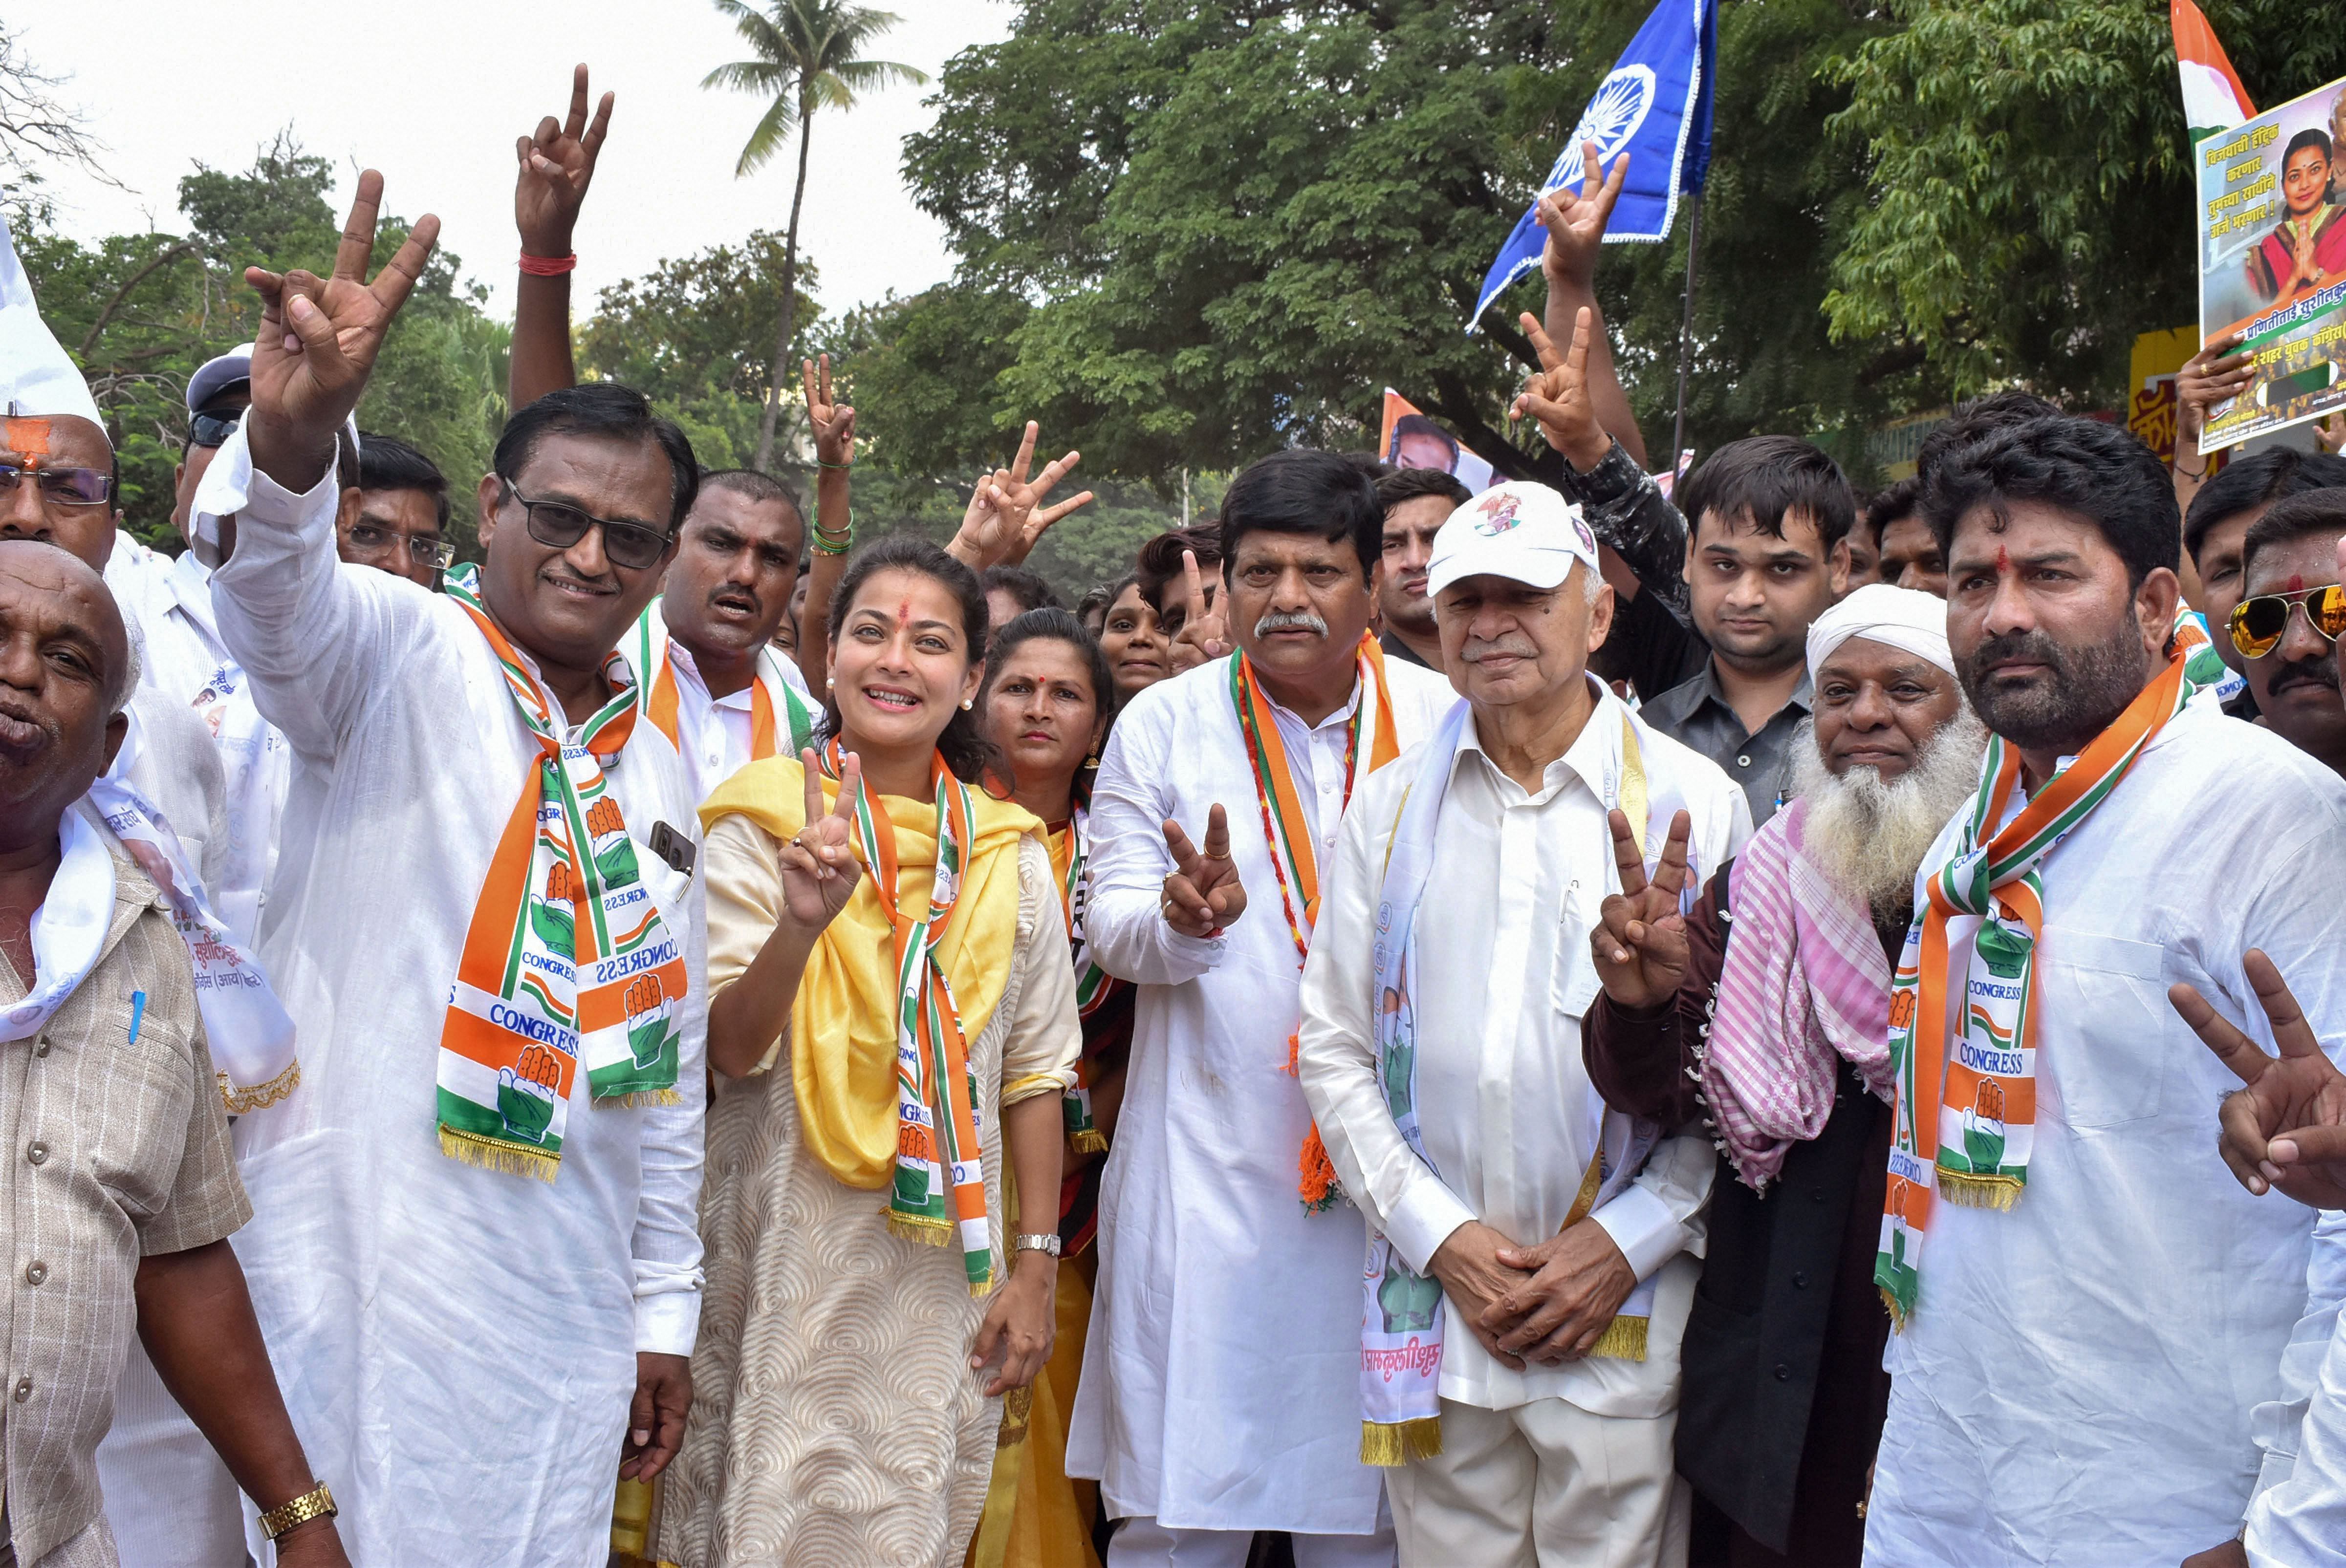 Congress candidate for Solapur seat Praniti Shinde with her father and former Union minister Sushilkumar Shinde and other leaders during her nomination filing procession, in Solapur, Maharashtra. (PTI Photo)